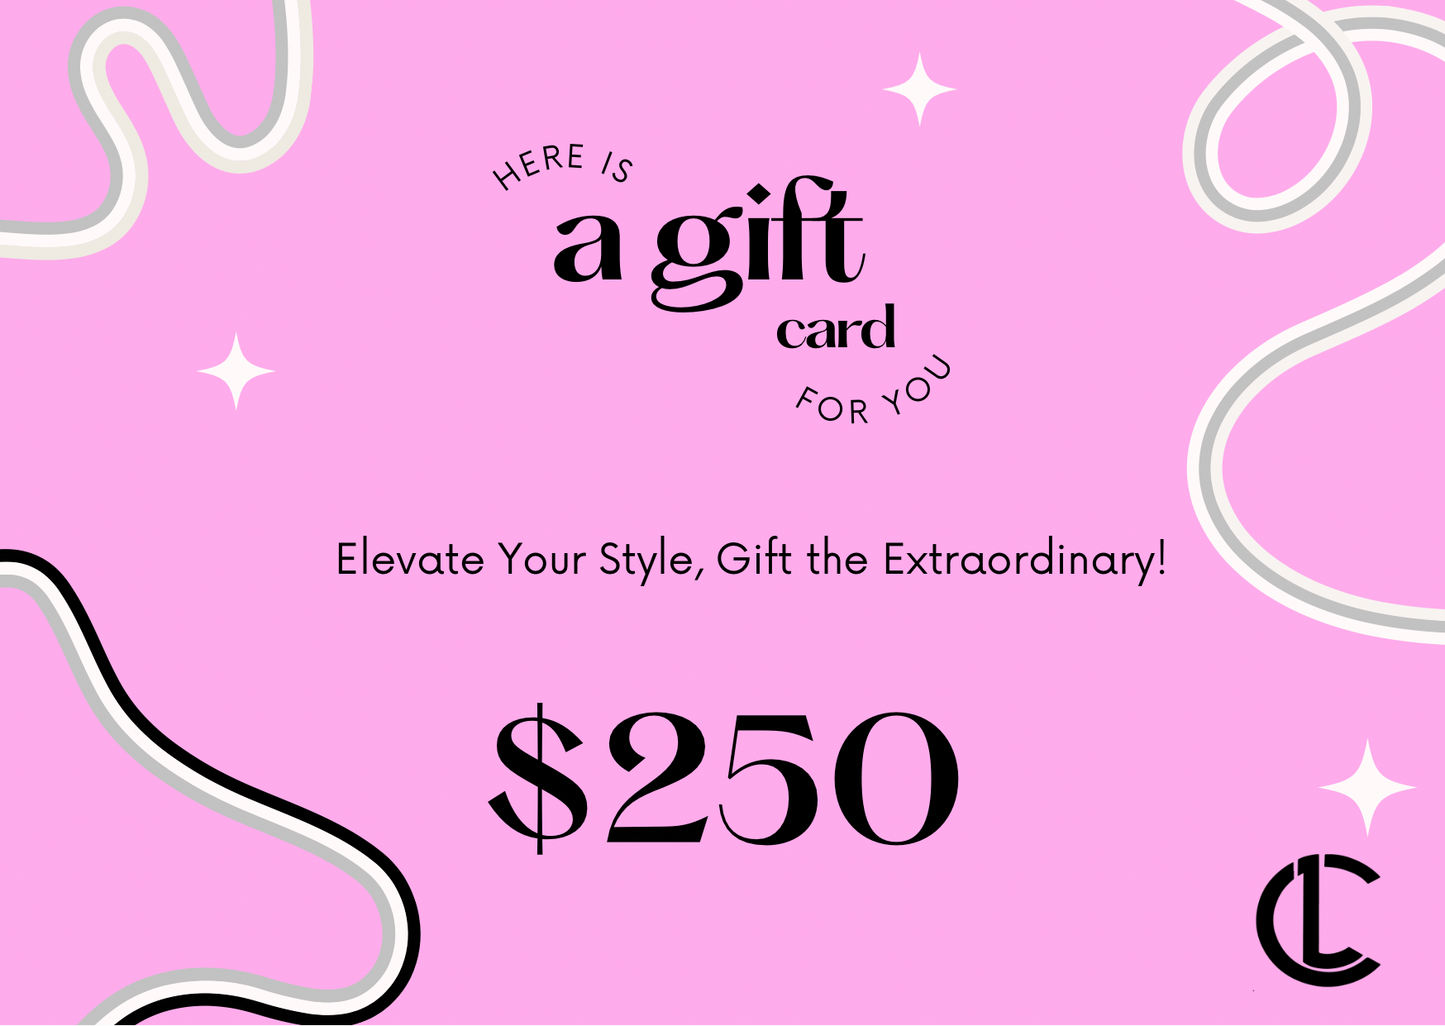 1st Class Lady “Gift Cards”